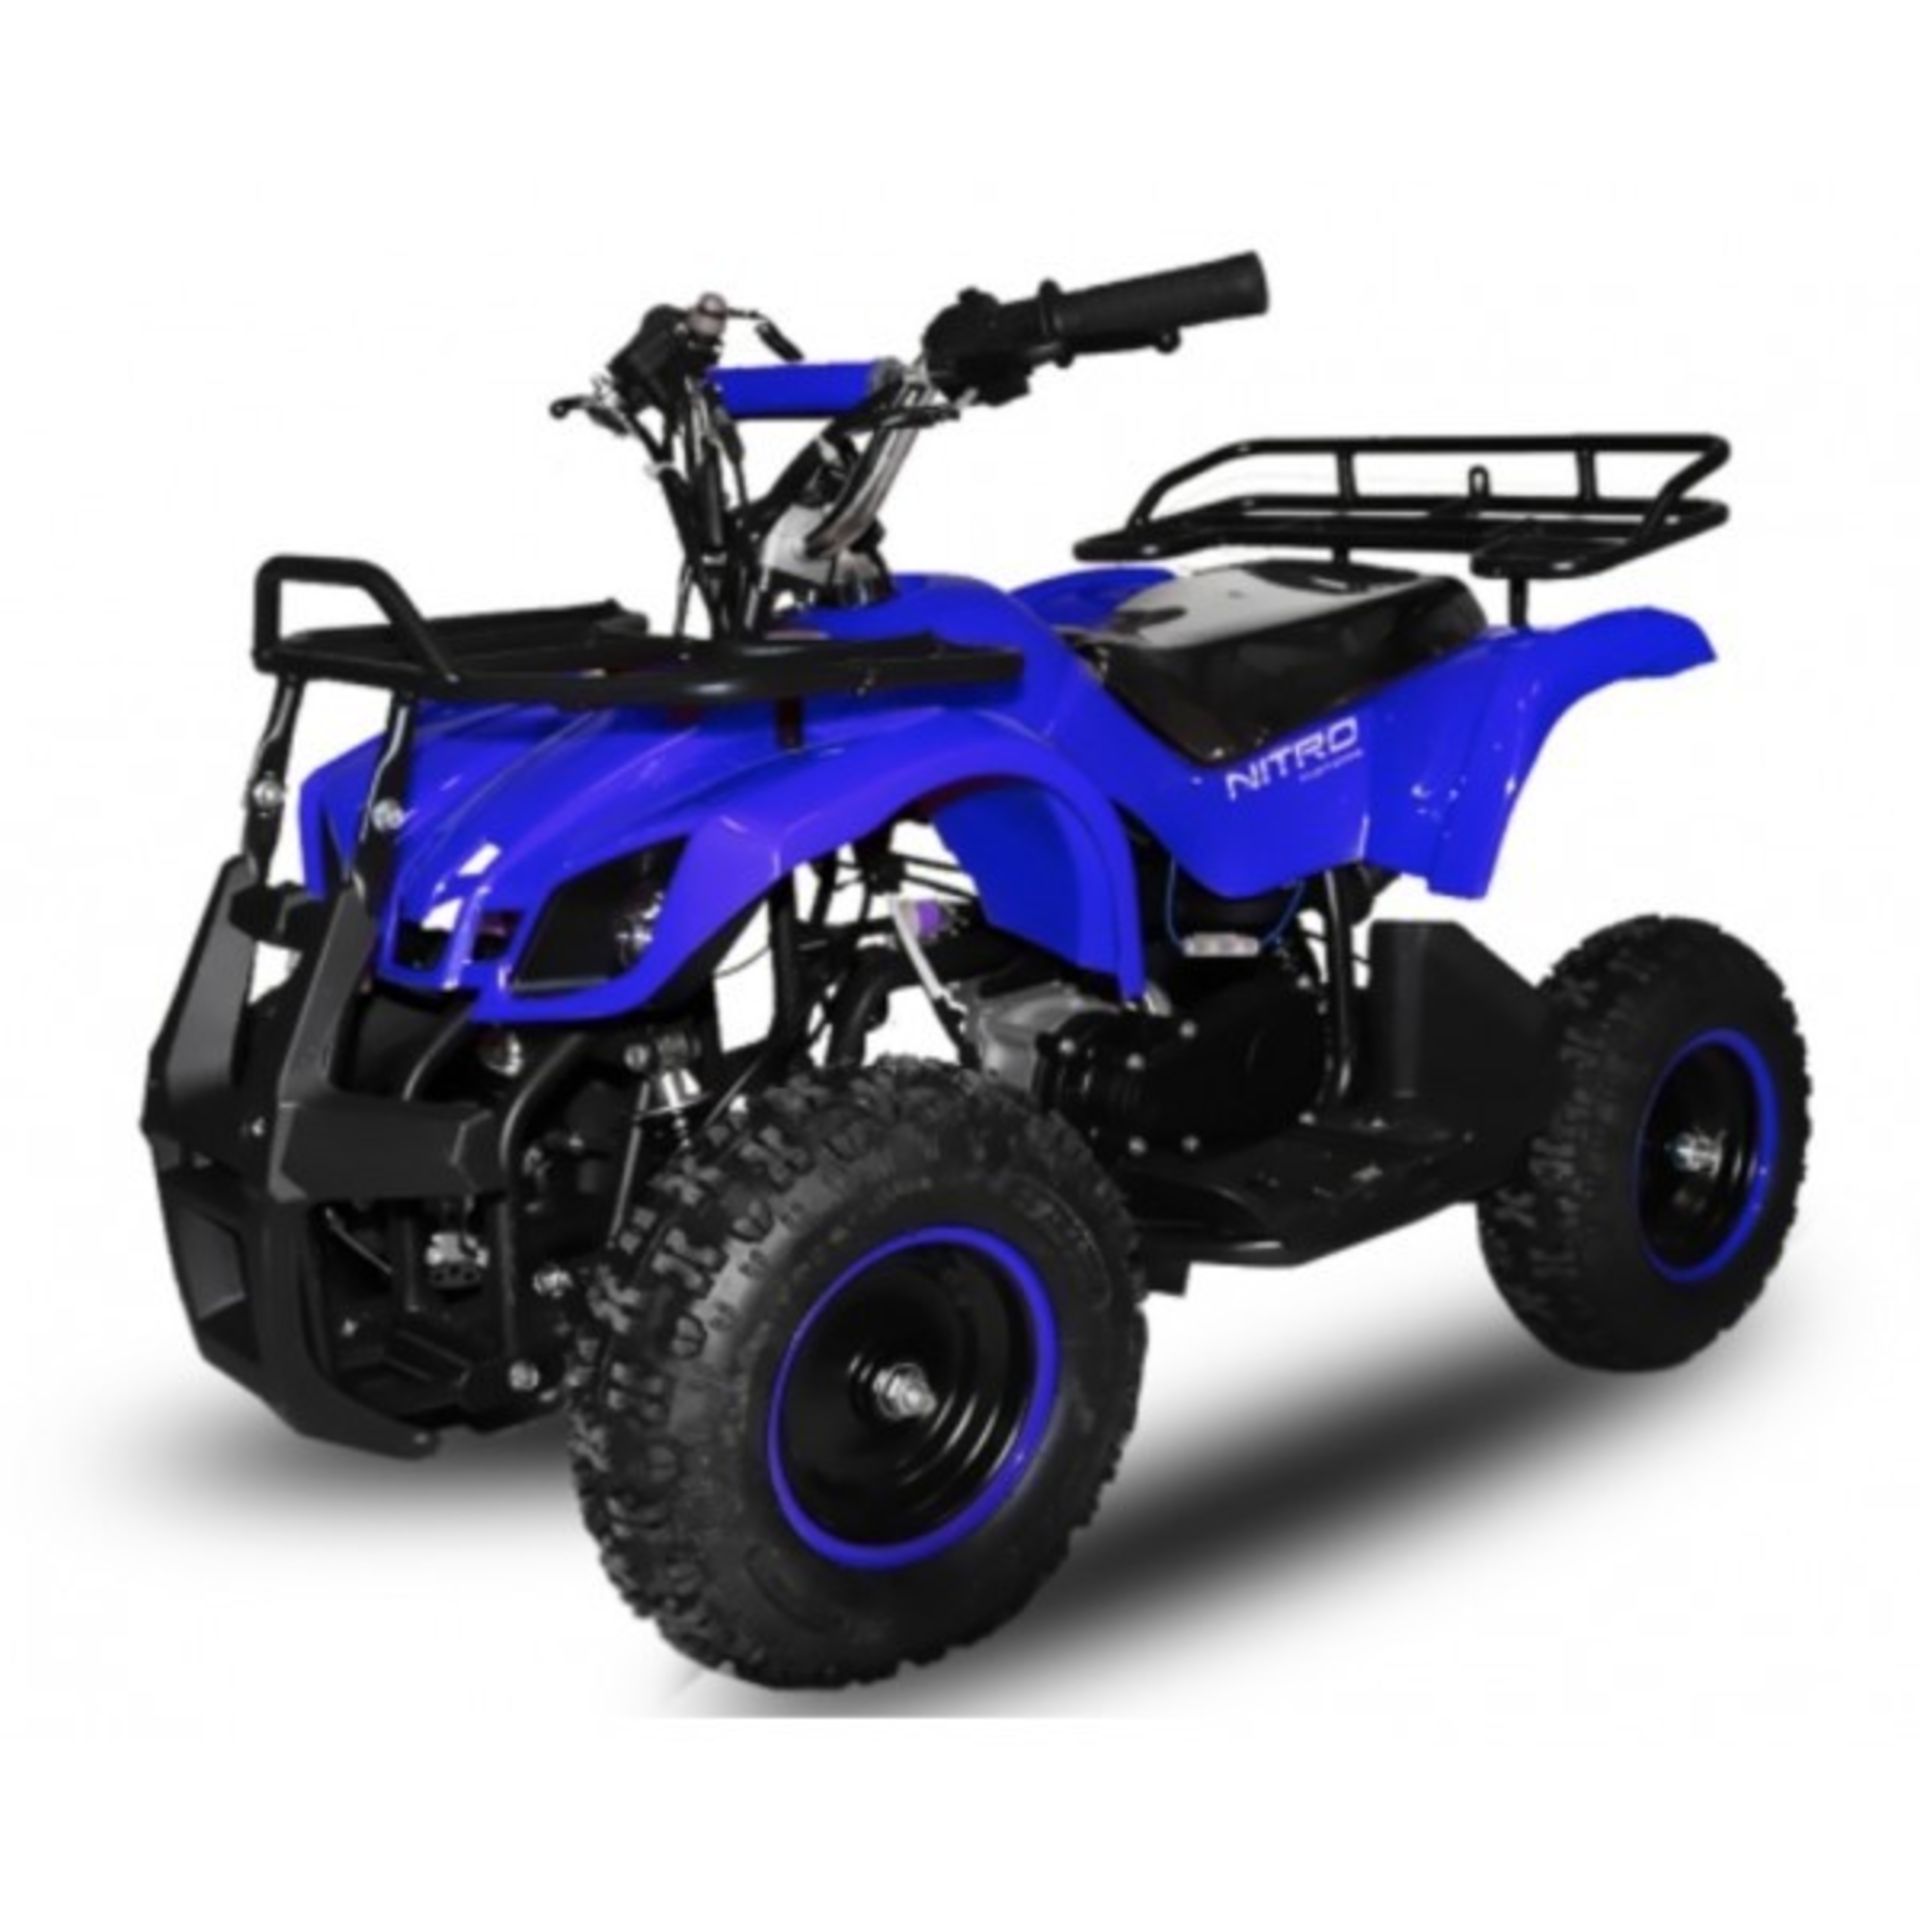 V Brand New 50cc Mini Quad Bike FRM - Colours May Vary - Front & Rear Frames - Picture May Vary From - Image 2 of 3